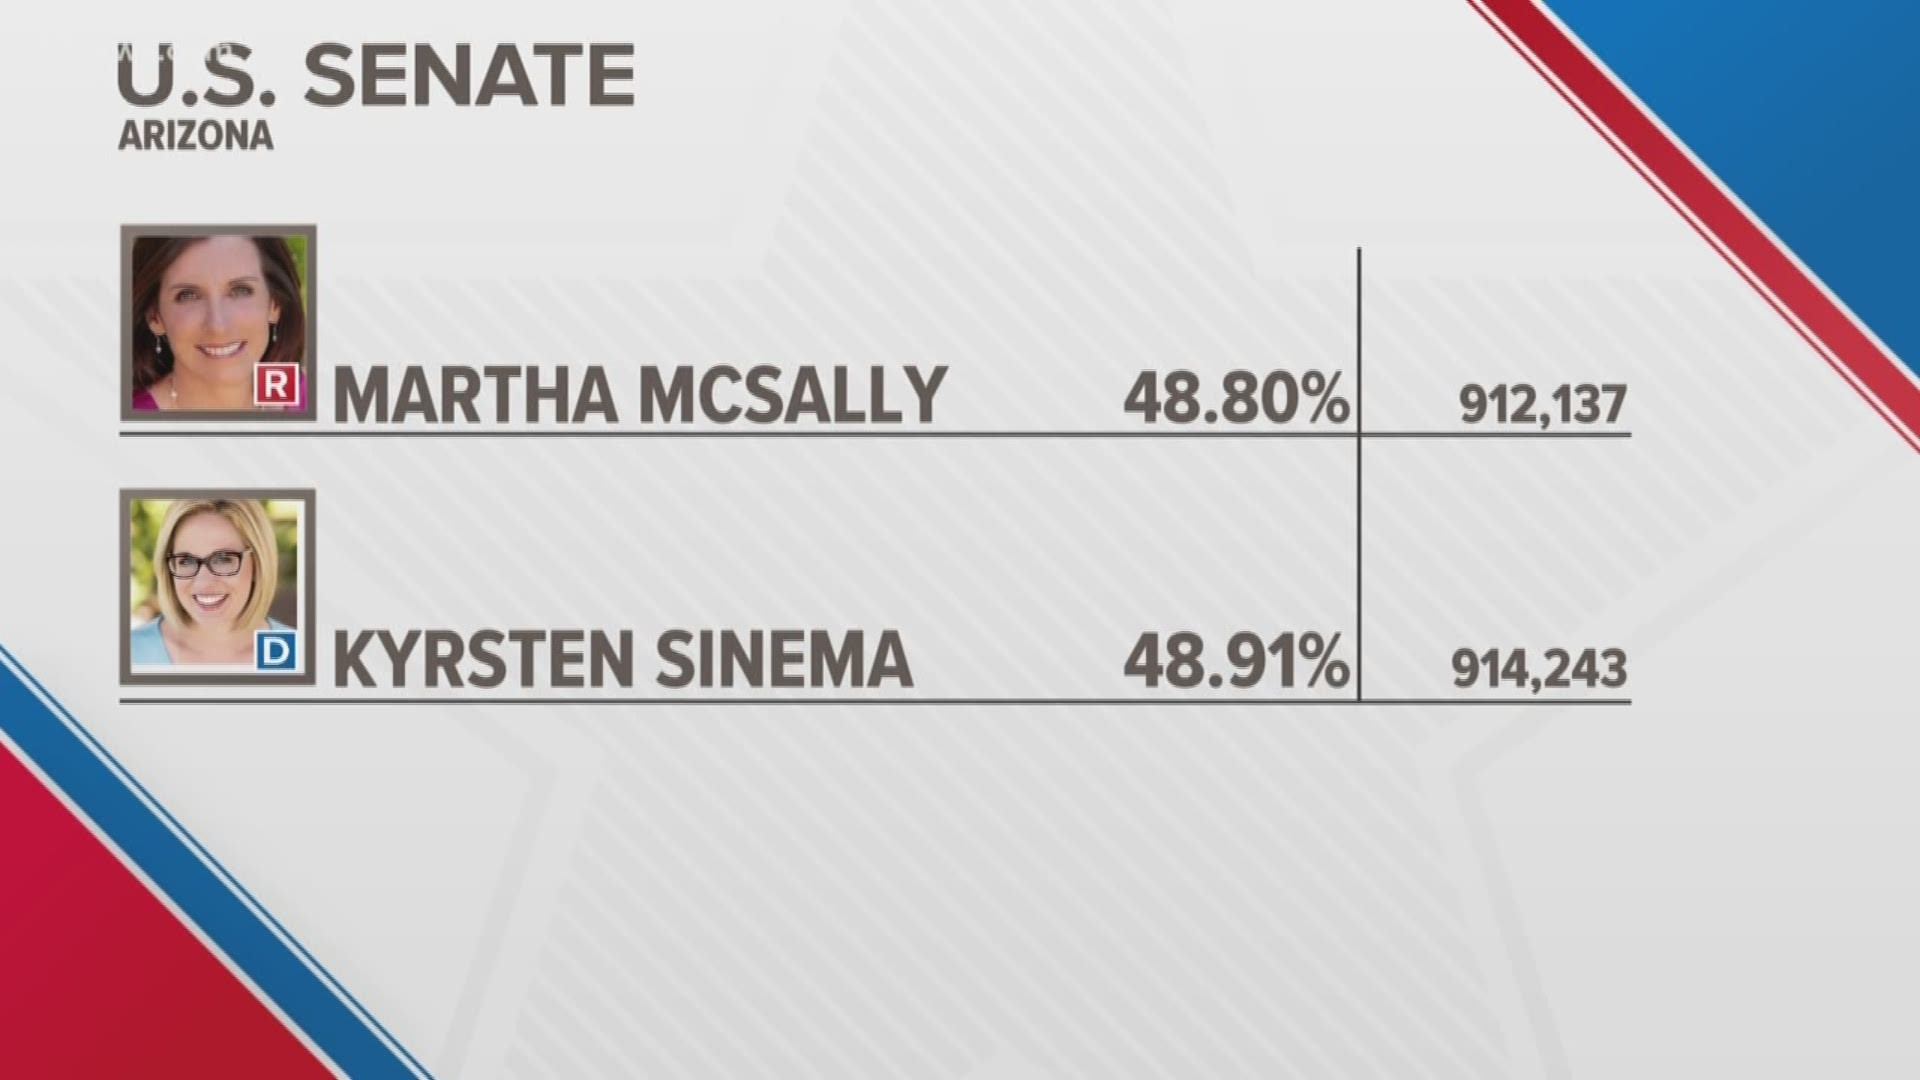 The latest update on numbers shows Democrat Kyrsten Sinema with a slight lead over Republican challenger Martha McSally. This comes as the Republican Party has filed a lawsuit attempting to stop ballots from being counted.